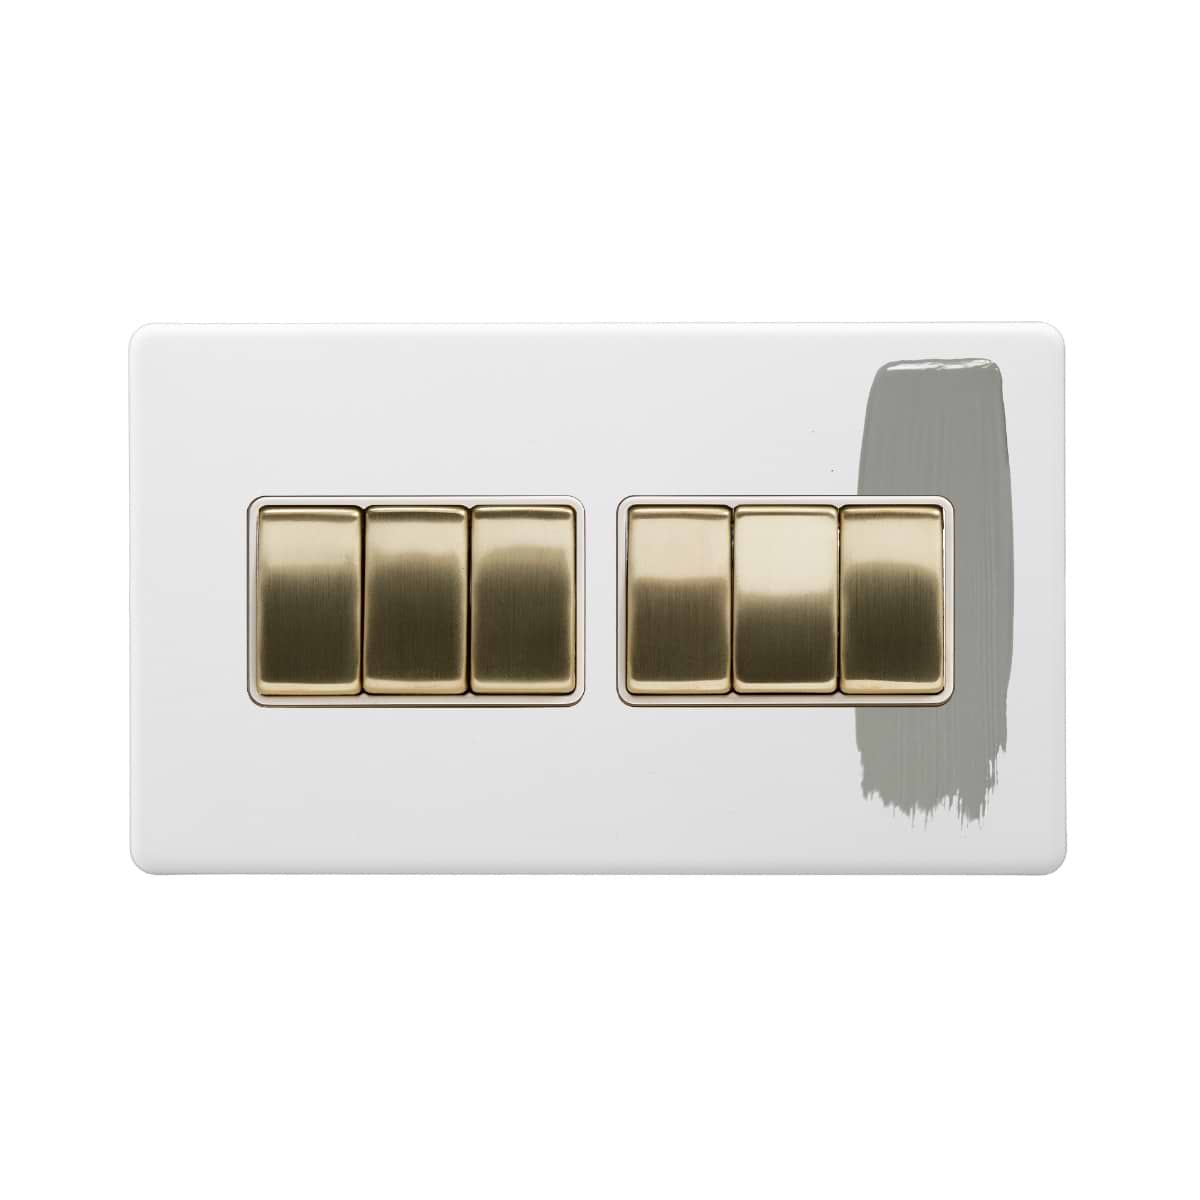 Paintable Light Switch  Soho Lighting Primed Paintable 6 Gang 2 Way 10A  Light Switch with Brushed Brass Switch with White Insert - Elesi